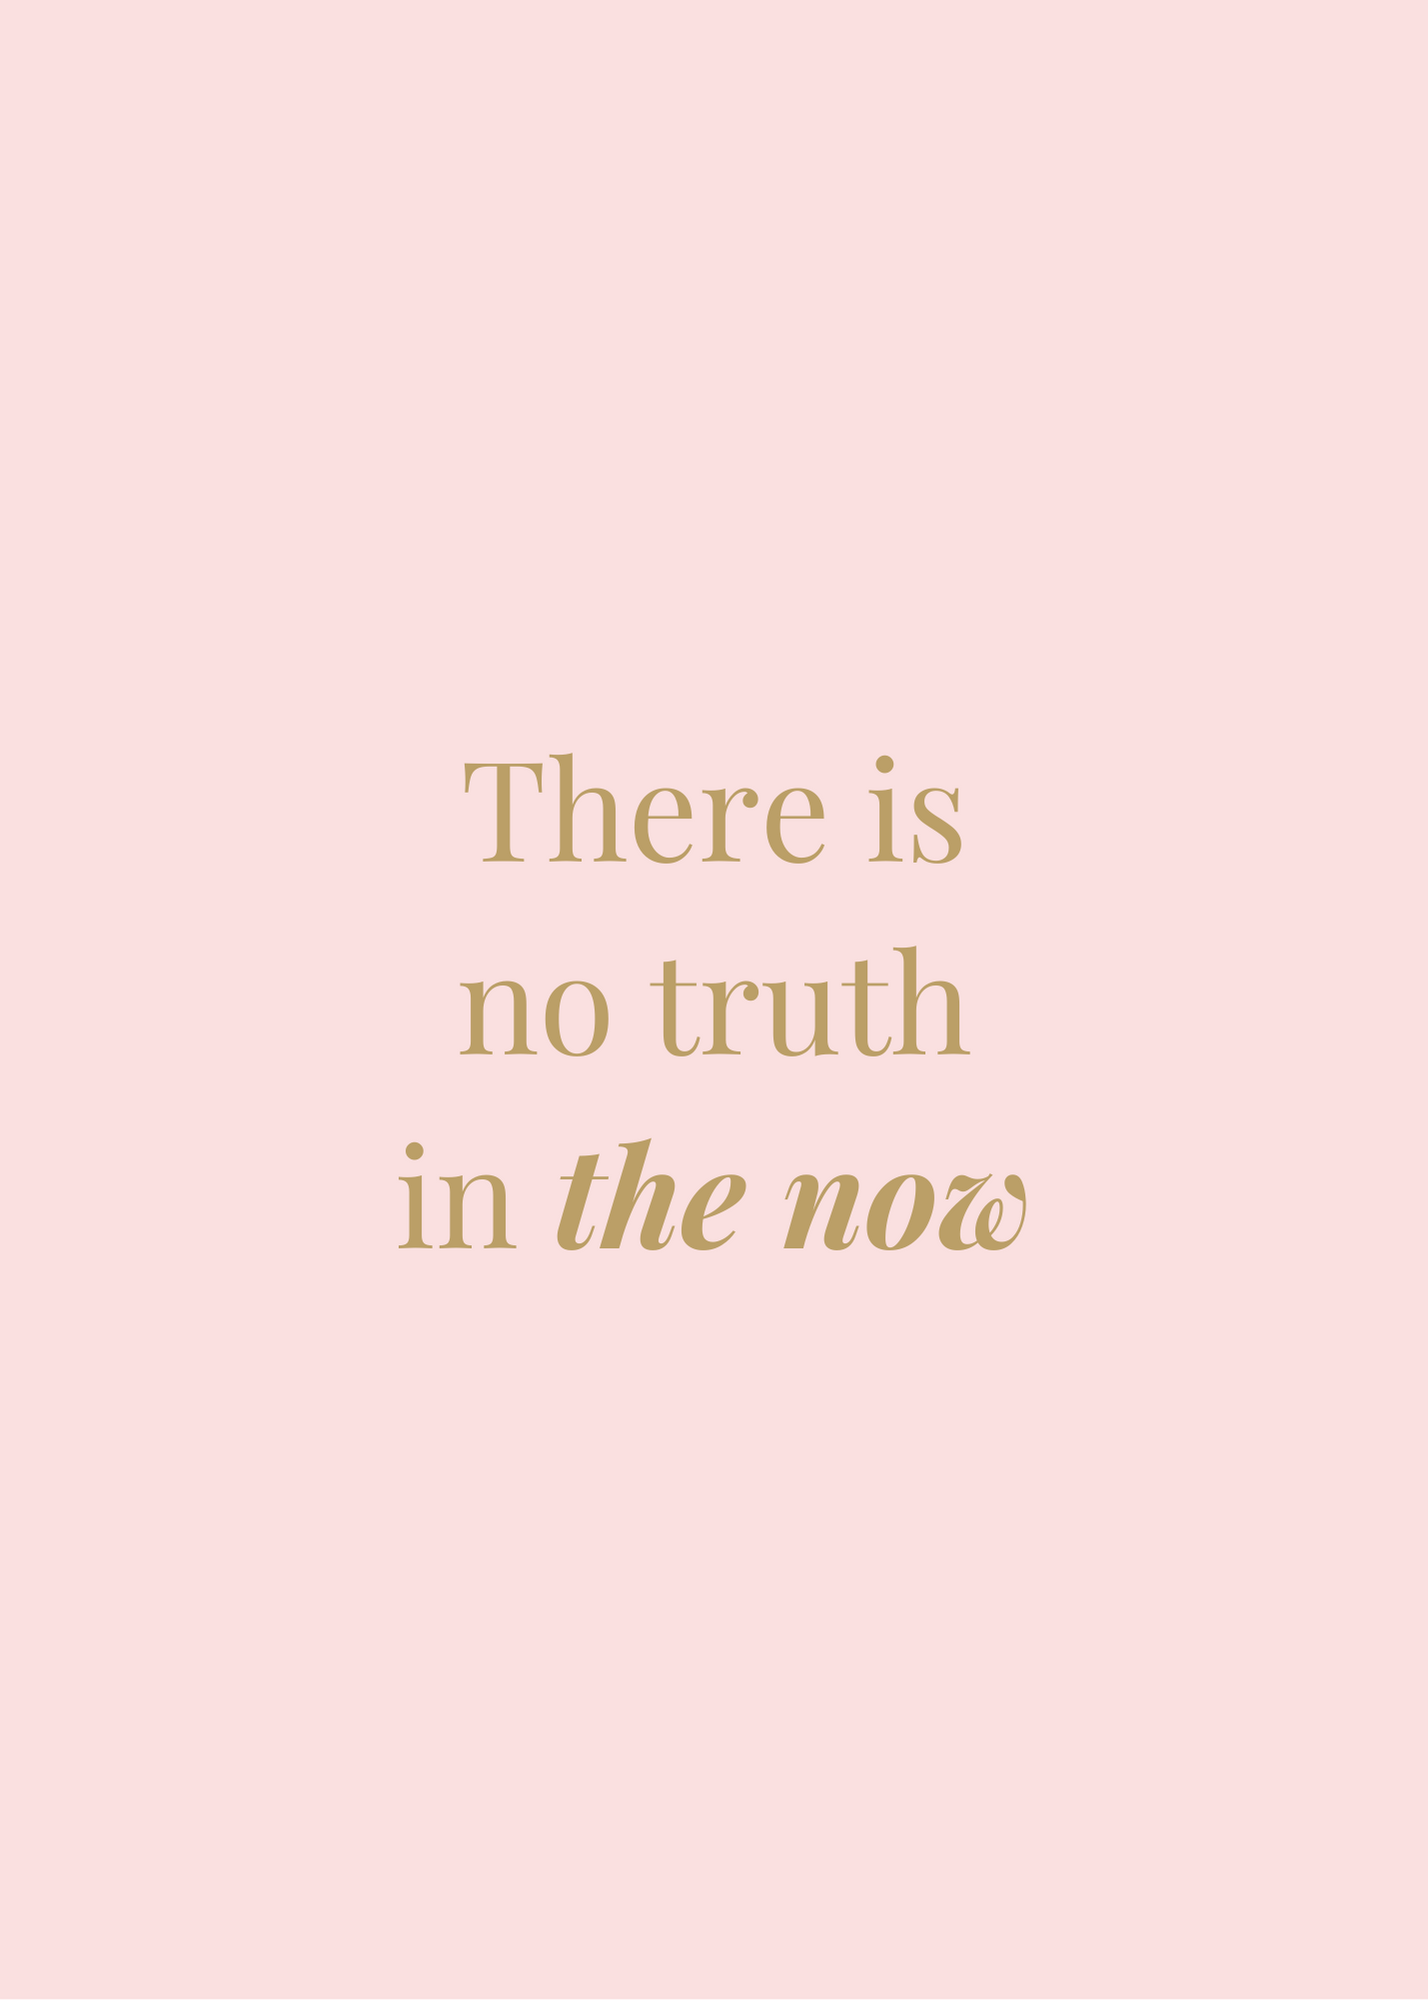 There is no truth in the now - a message for emotional authorities